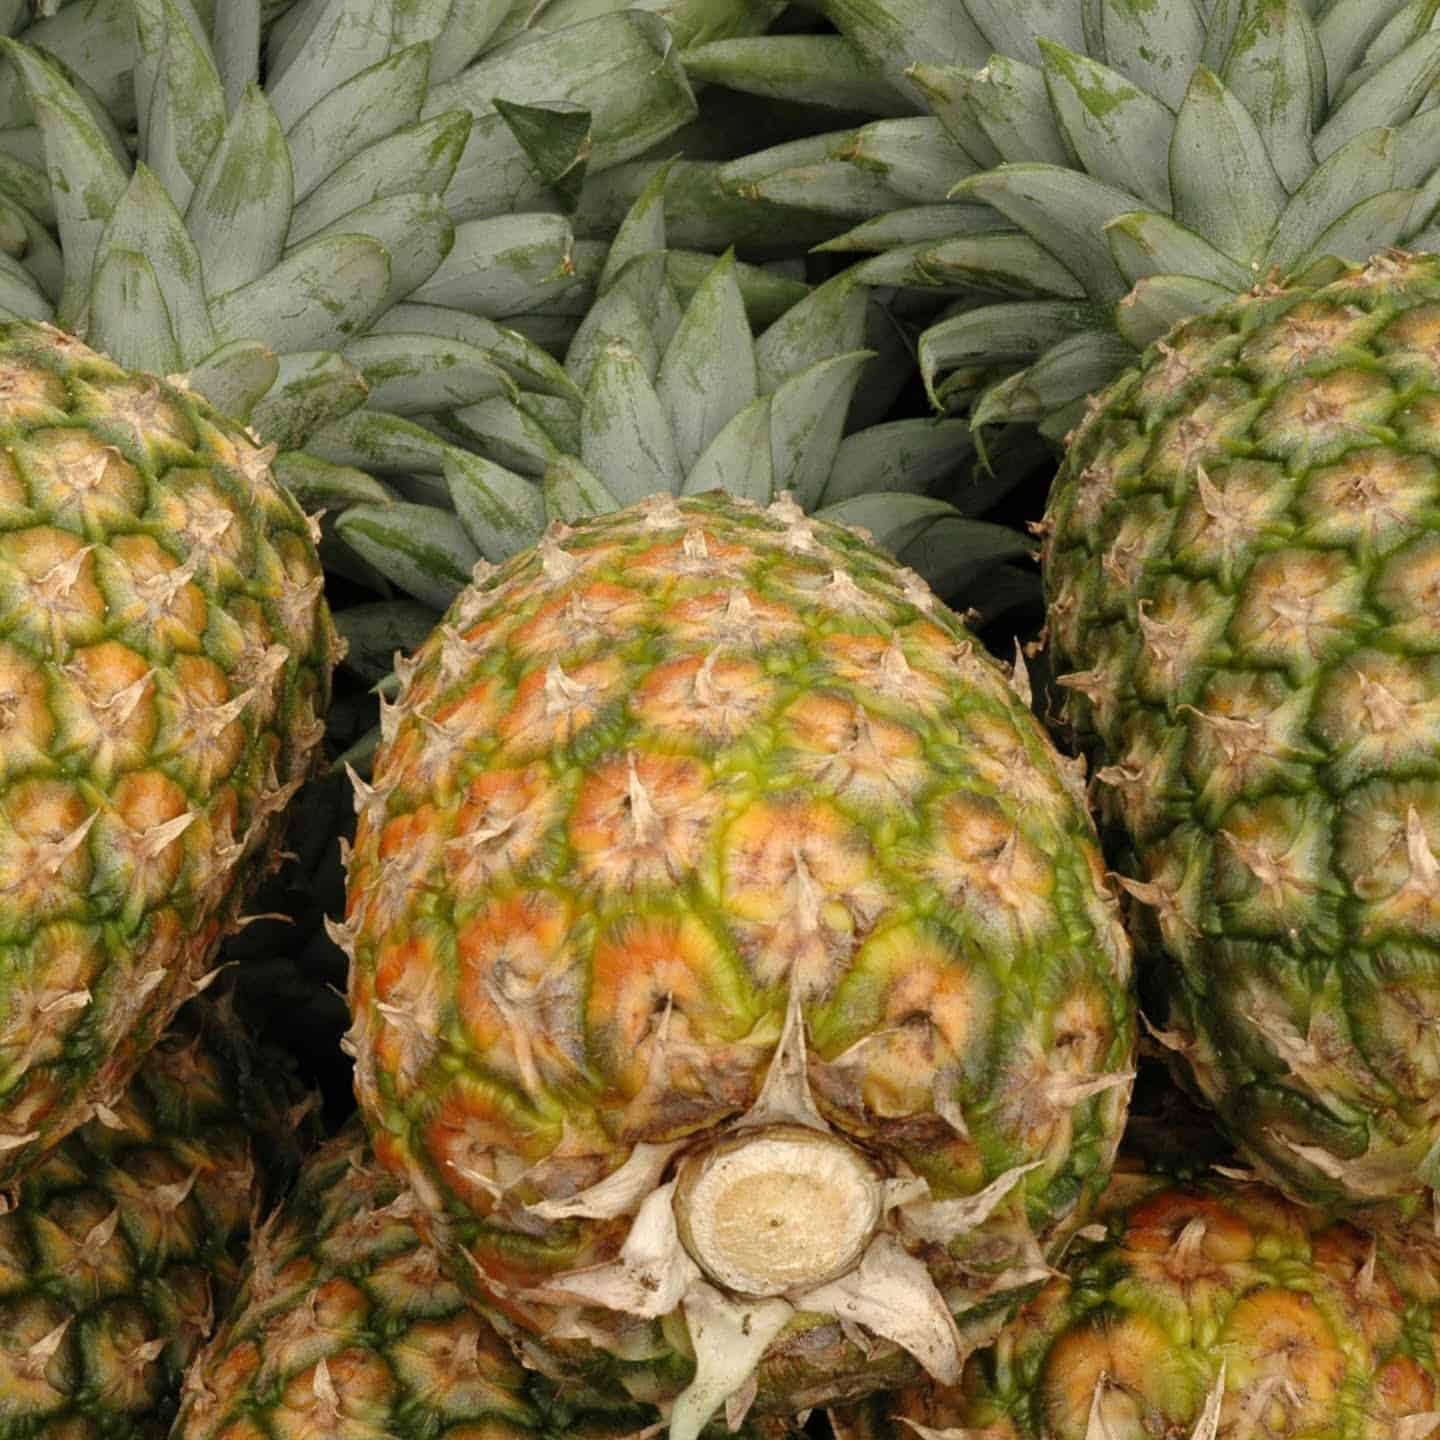 Smell the bottom of the pineapple to check ripeness